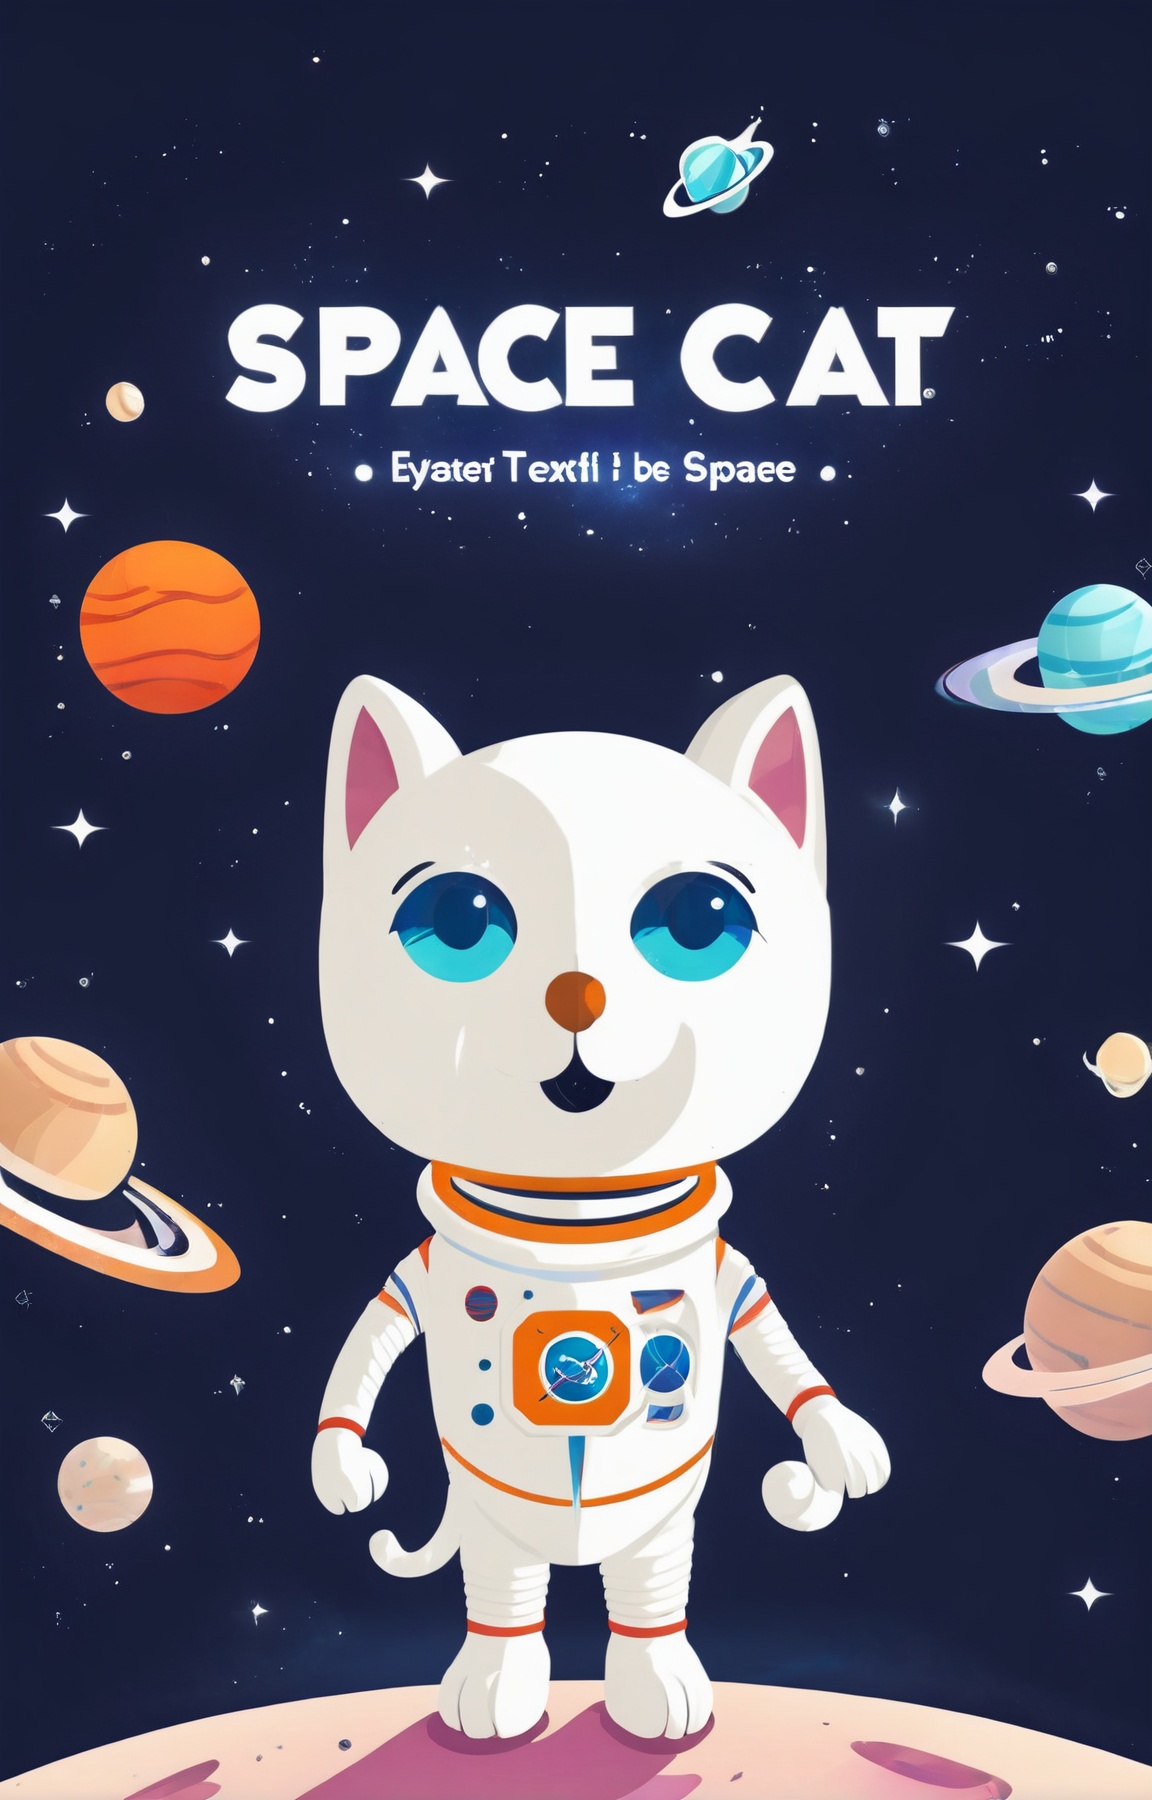 (cover text "SPACE CAT":5), A logo for a cat space-food company, a cute kawaii cat wearing a party hat, cats in space, hig...